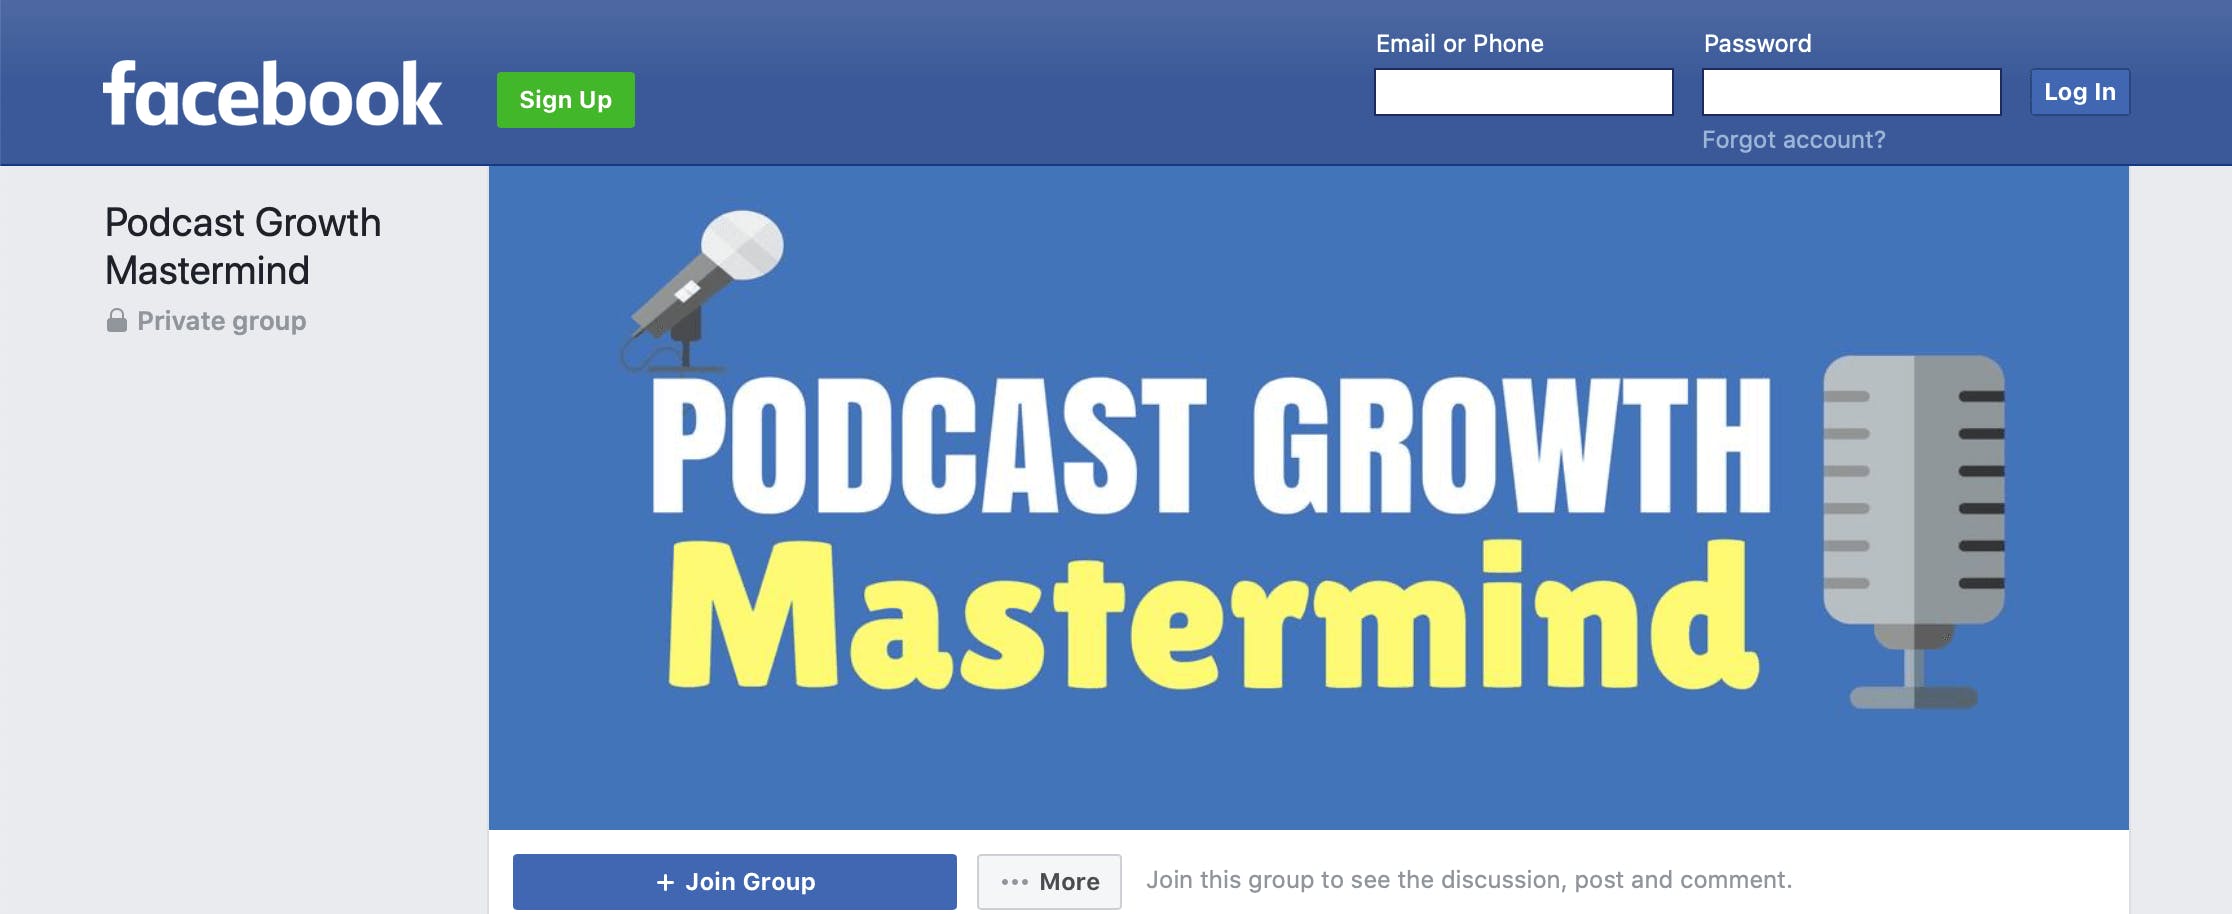 Podcast Growth Mastermind Facebook page